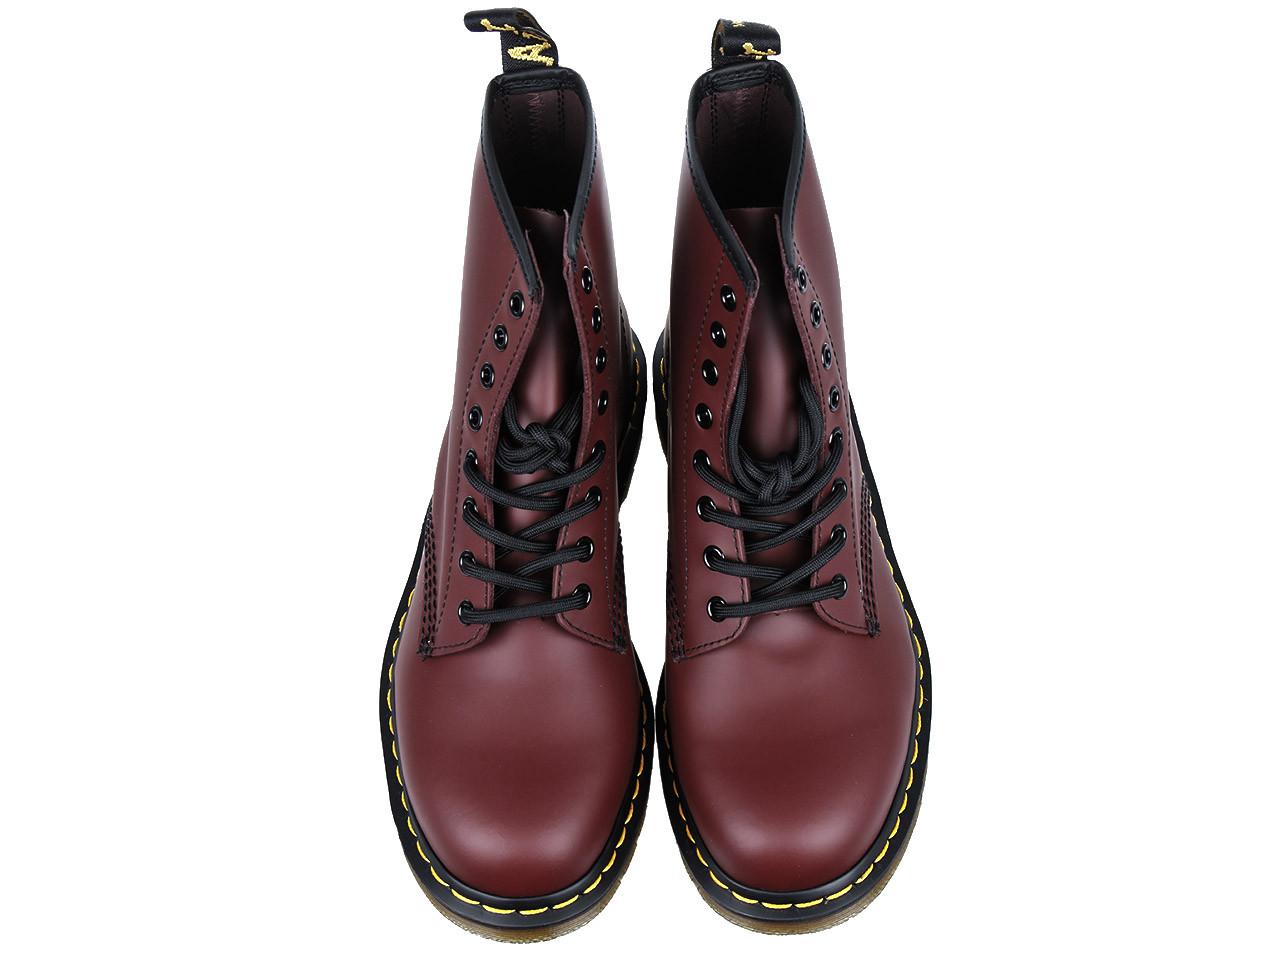 Dr. Martens Cherry Red Smooth 1460- 11822600